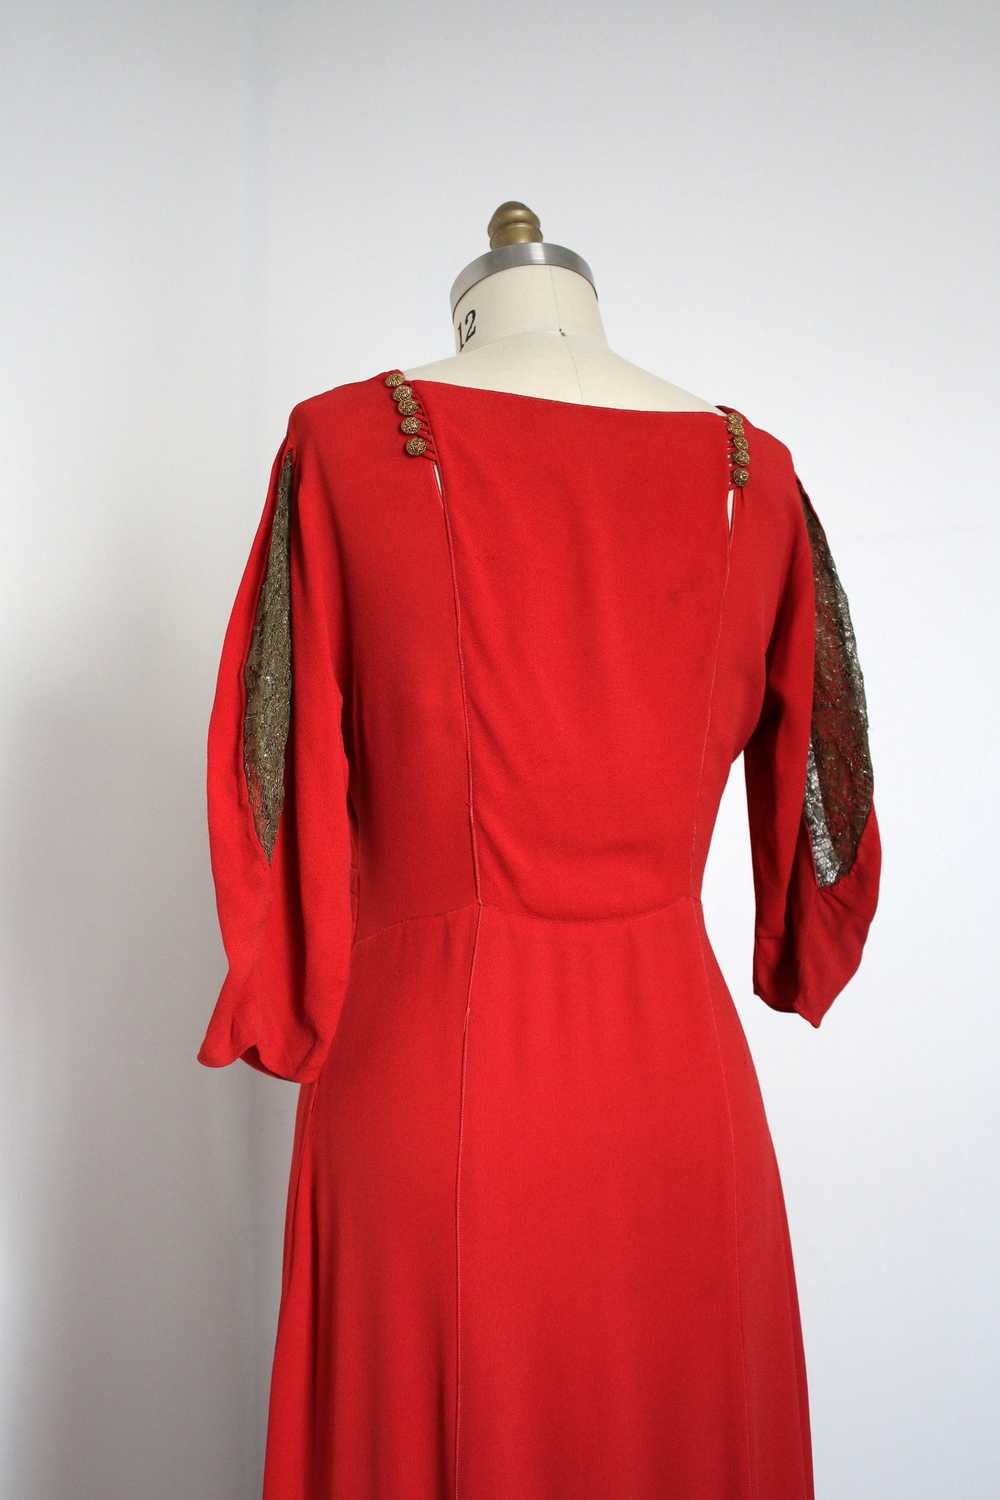 MARKED DOWN vintage 1930s orange rayon gown - image 5